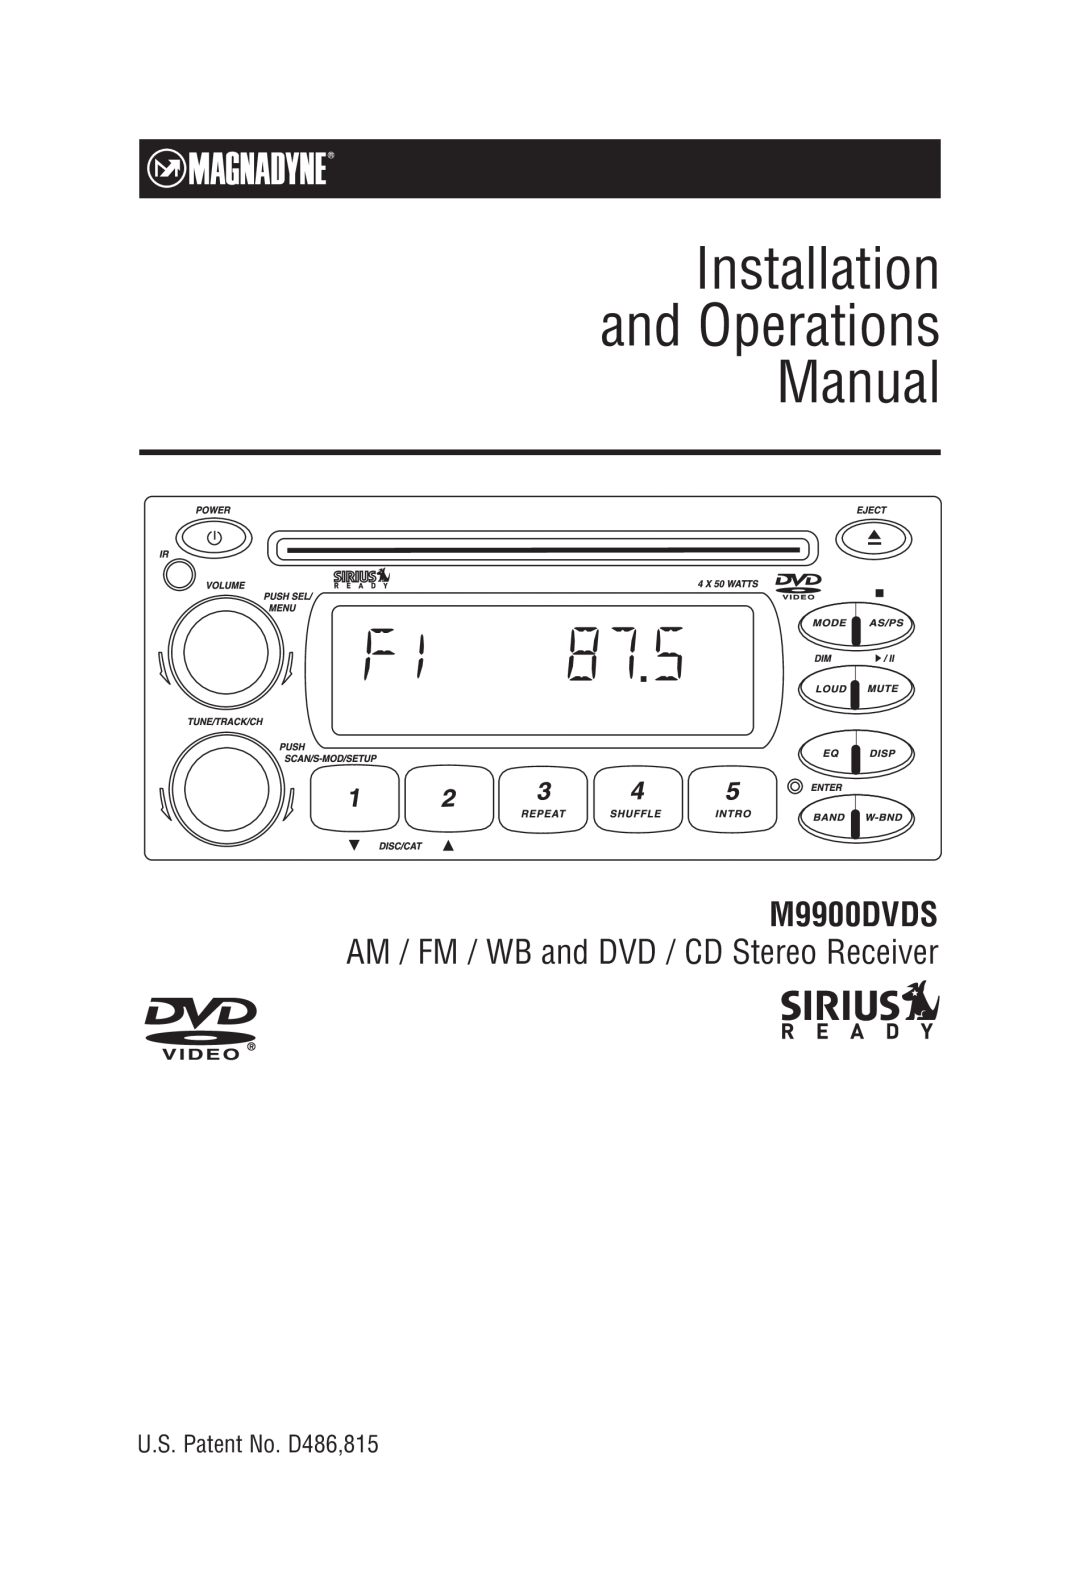 Carbine M9900DVDS manual U.S. Patent No. D486,815, Installation and Operations Manual 